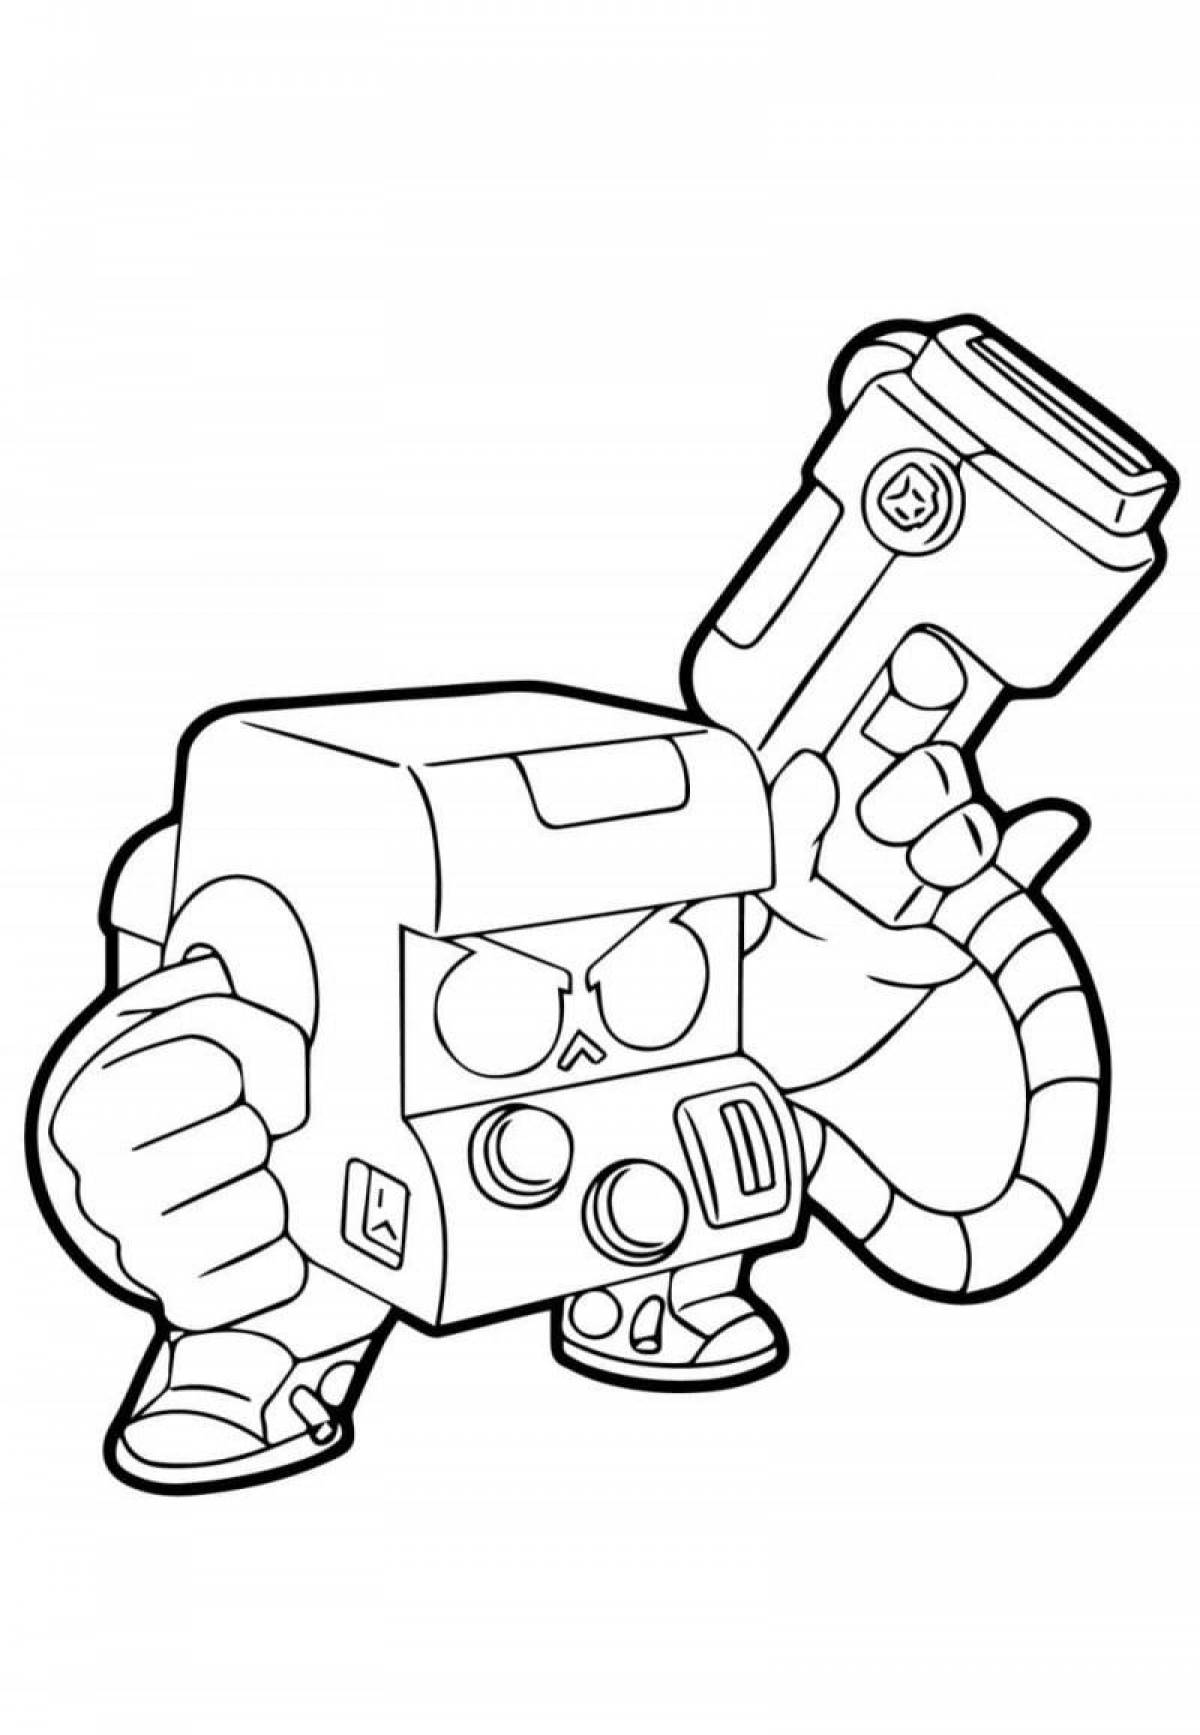 Bright bravo stars coloring pages for boys